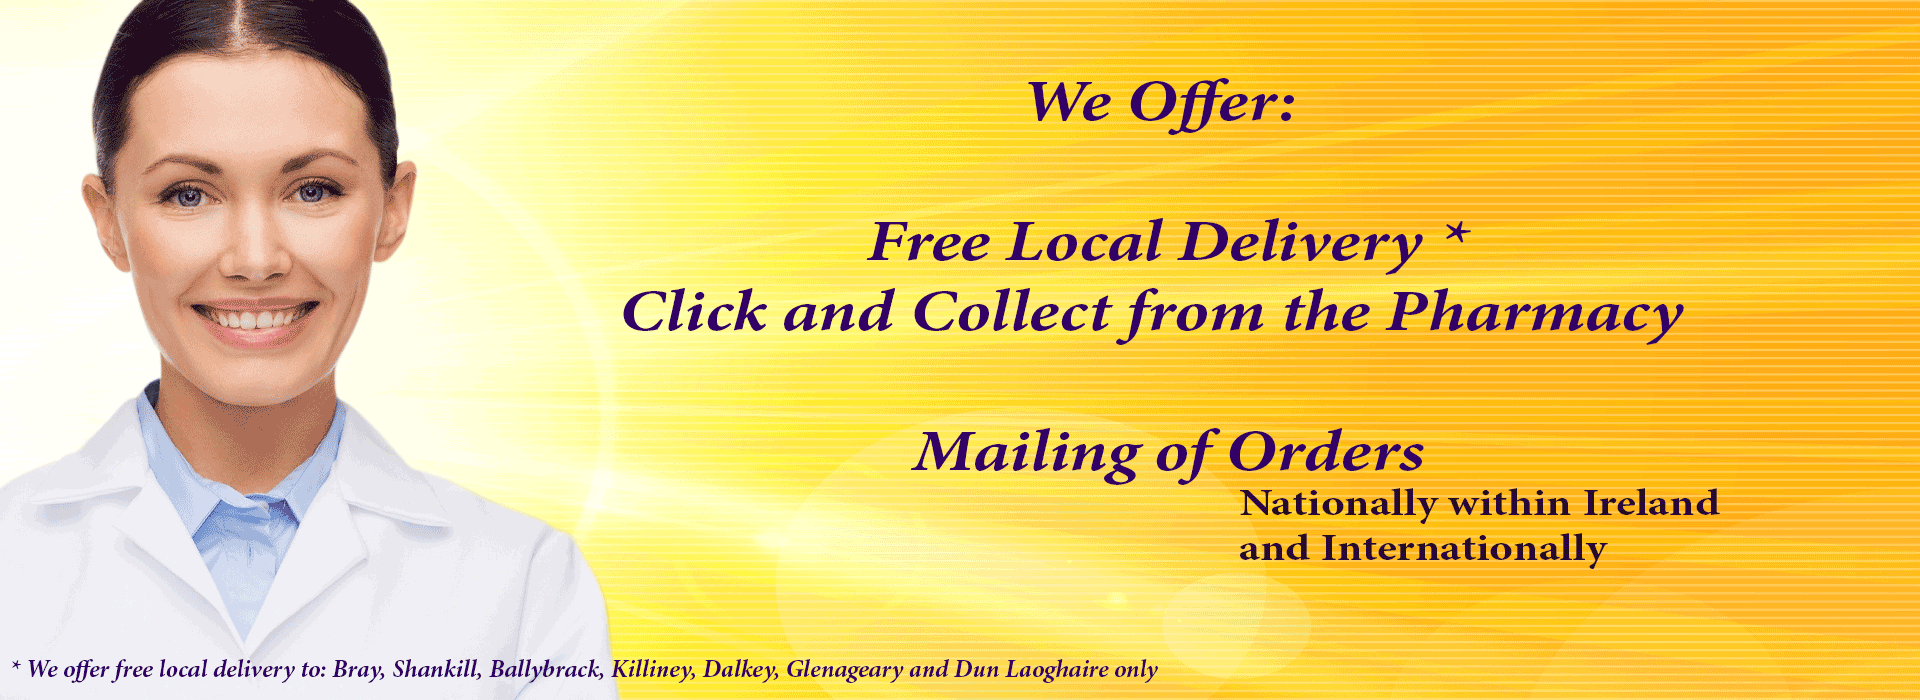 We offer local delivery to bray shankill ballybrack killiney dalkey sandycove glasthule and dun laoghaire